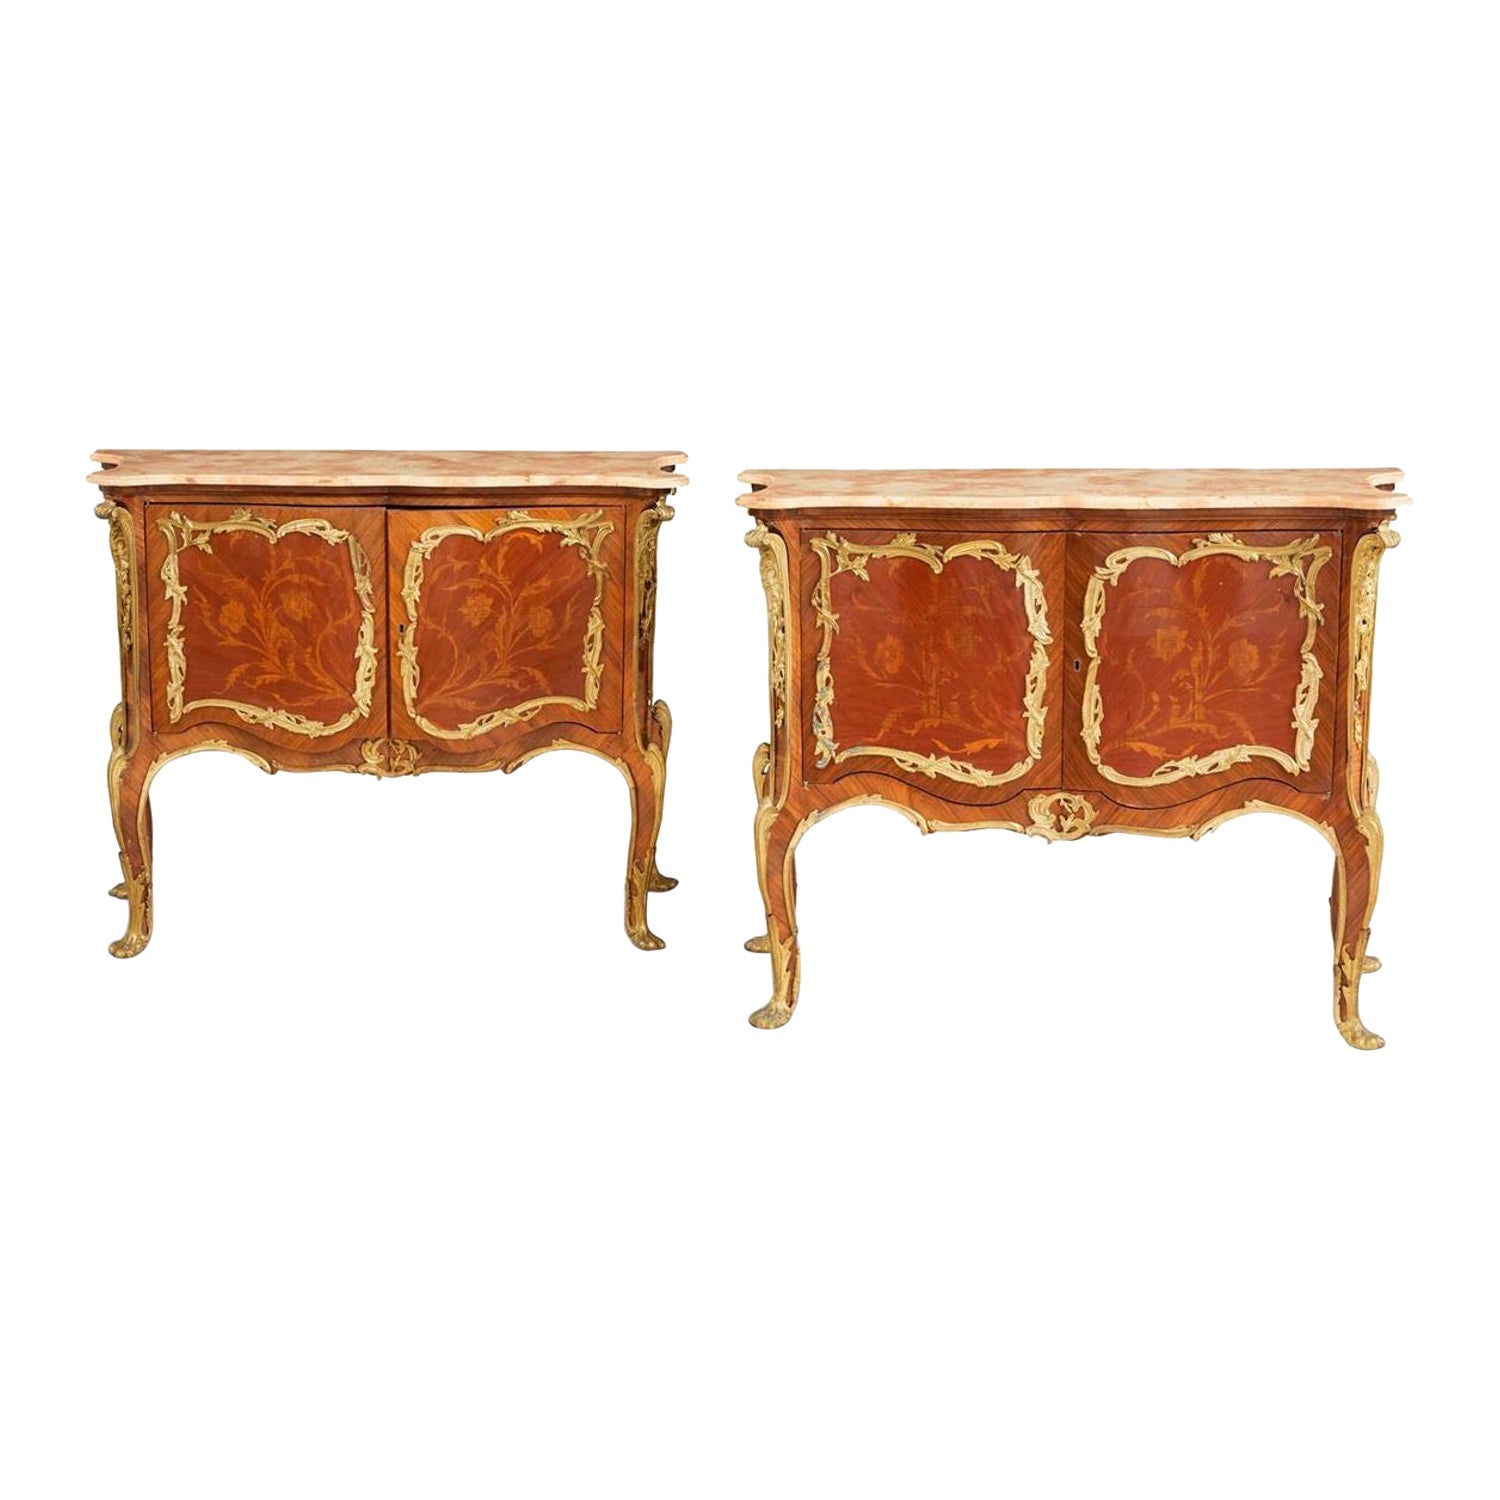 Pair of French Kingwood Bronze Mounted Commodes / Chest of Drawers, Nightstands